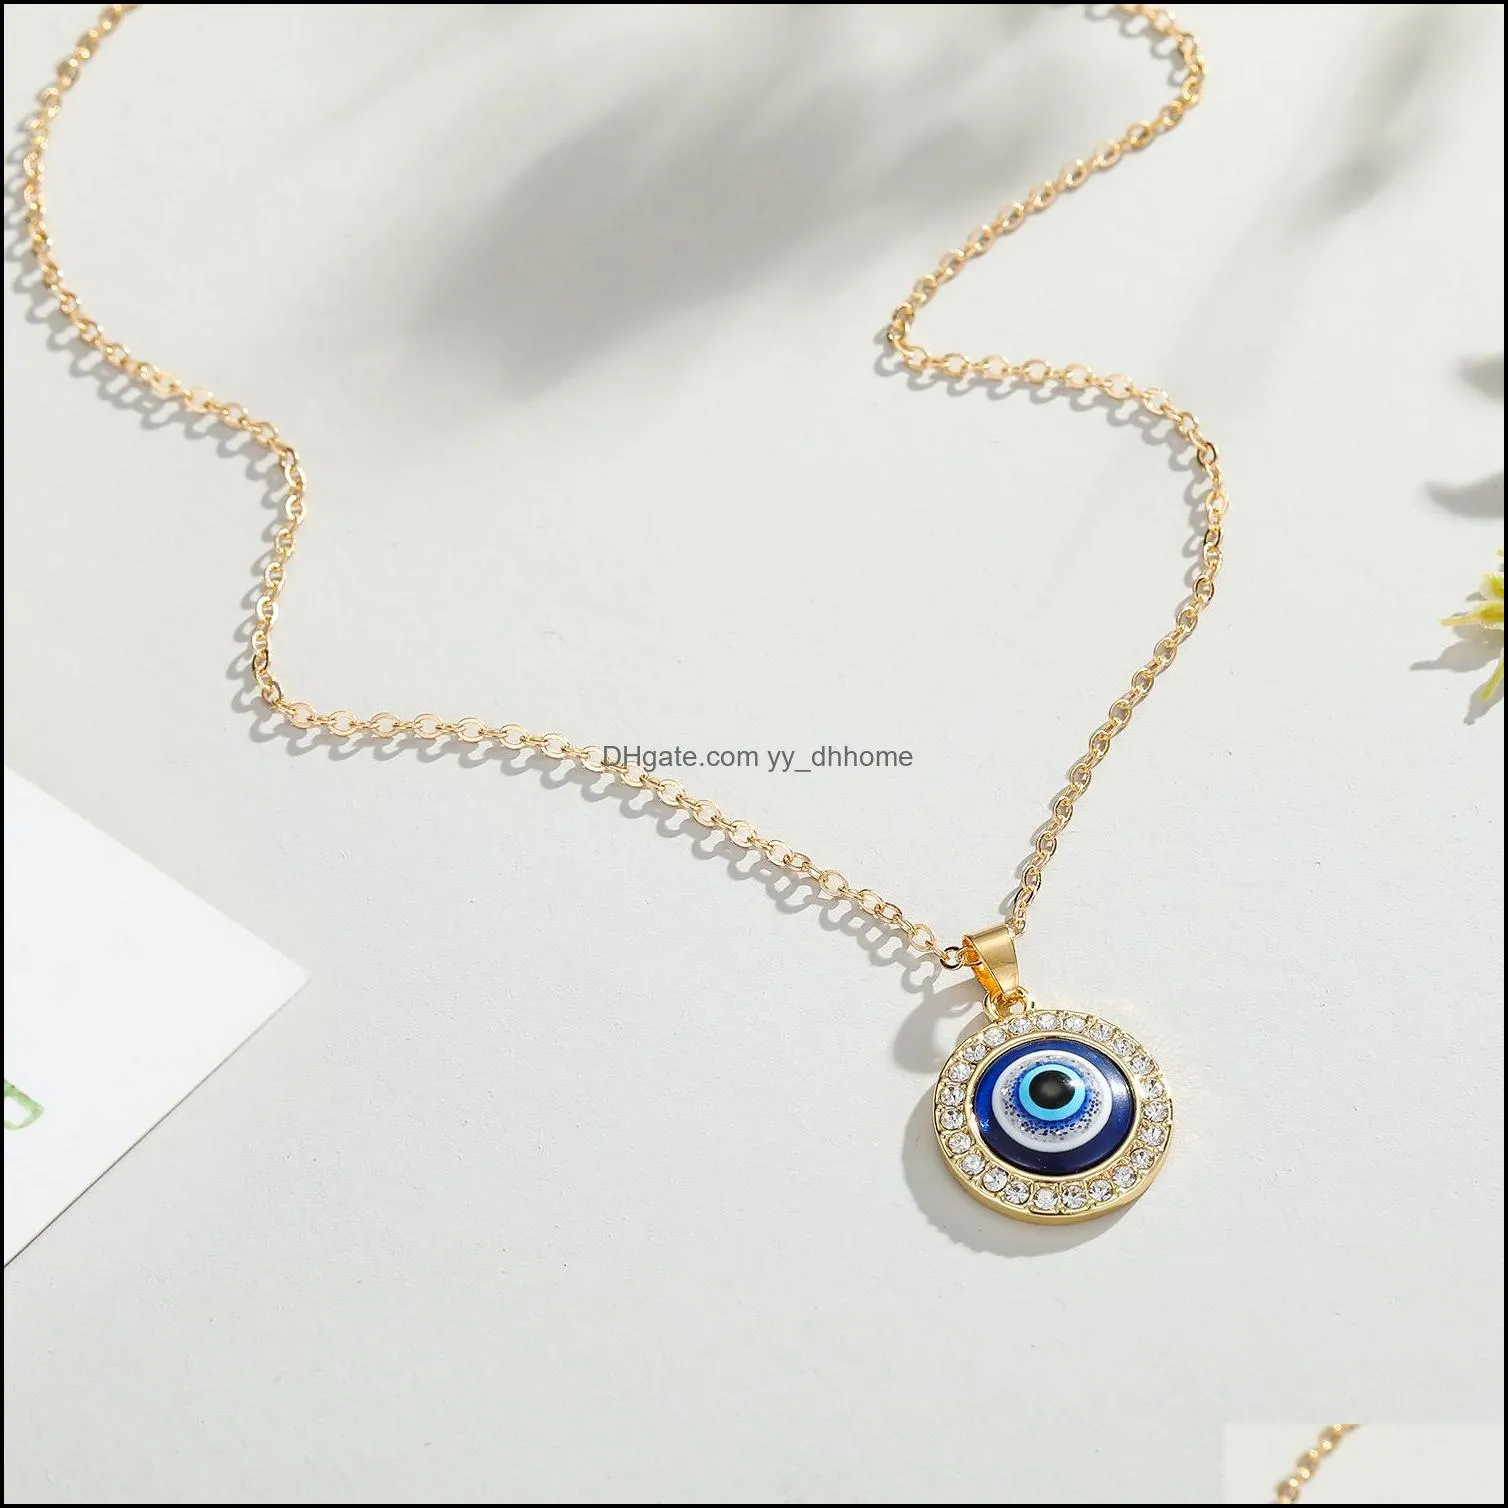 ups new jewelry turkish eye necklace dot party favor diamond round blue eye pendant necklace foreign trade sweater chain jewelry